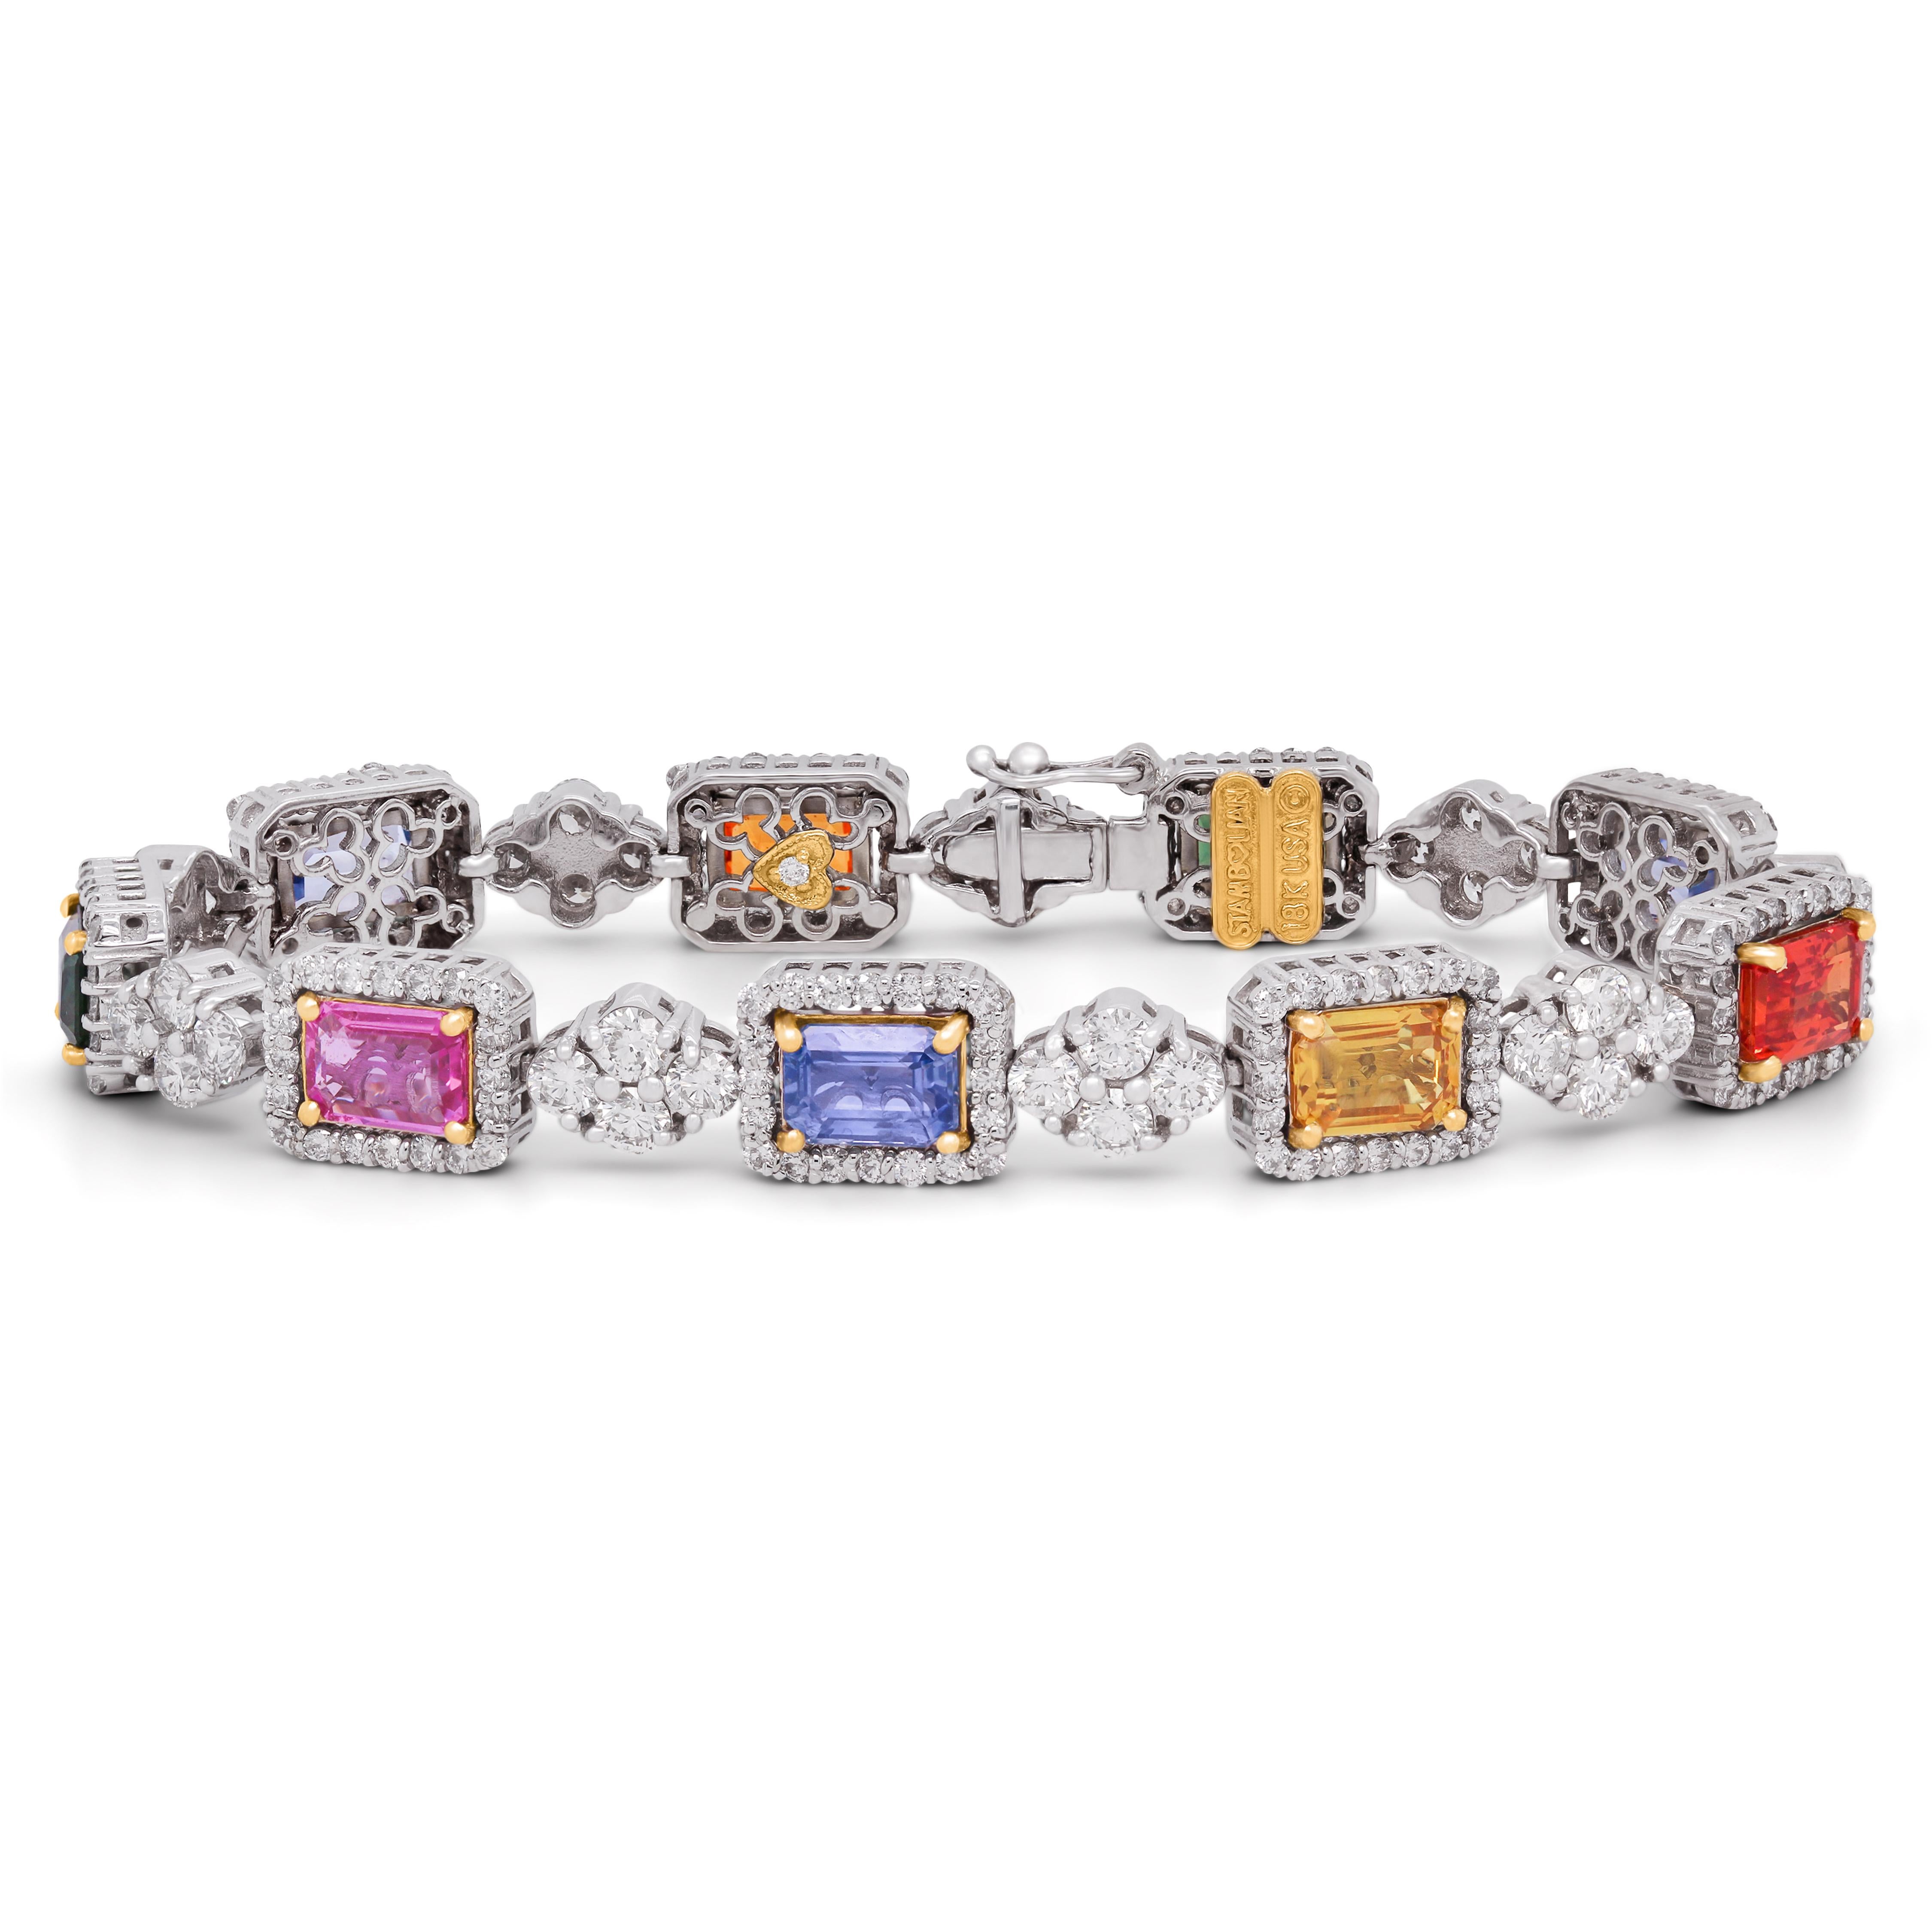 Stambolian 18K White Gold Diamond Multi Color Sapphire Bracelet

Bracelet features nine, Emerald-Cut, Multi-Color Sapphires. Colors included are yellow, orange, blue, pink, green. No two of these bracelets have the same color-combinations, making